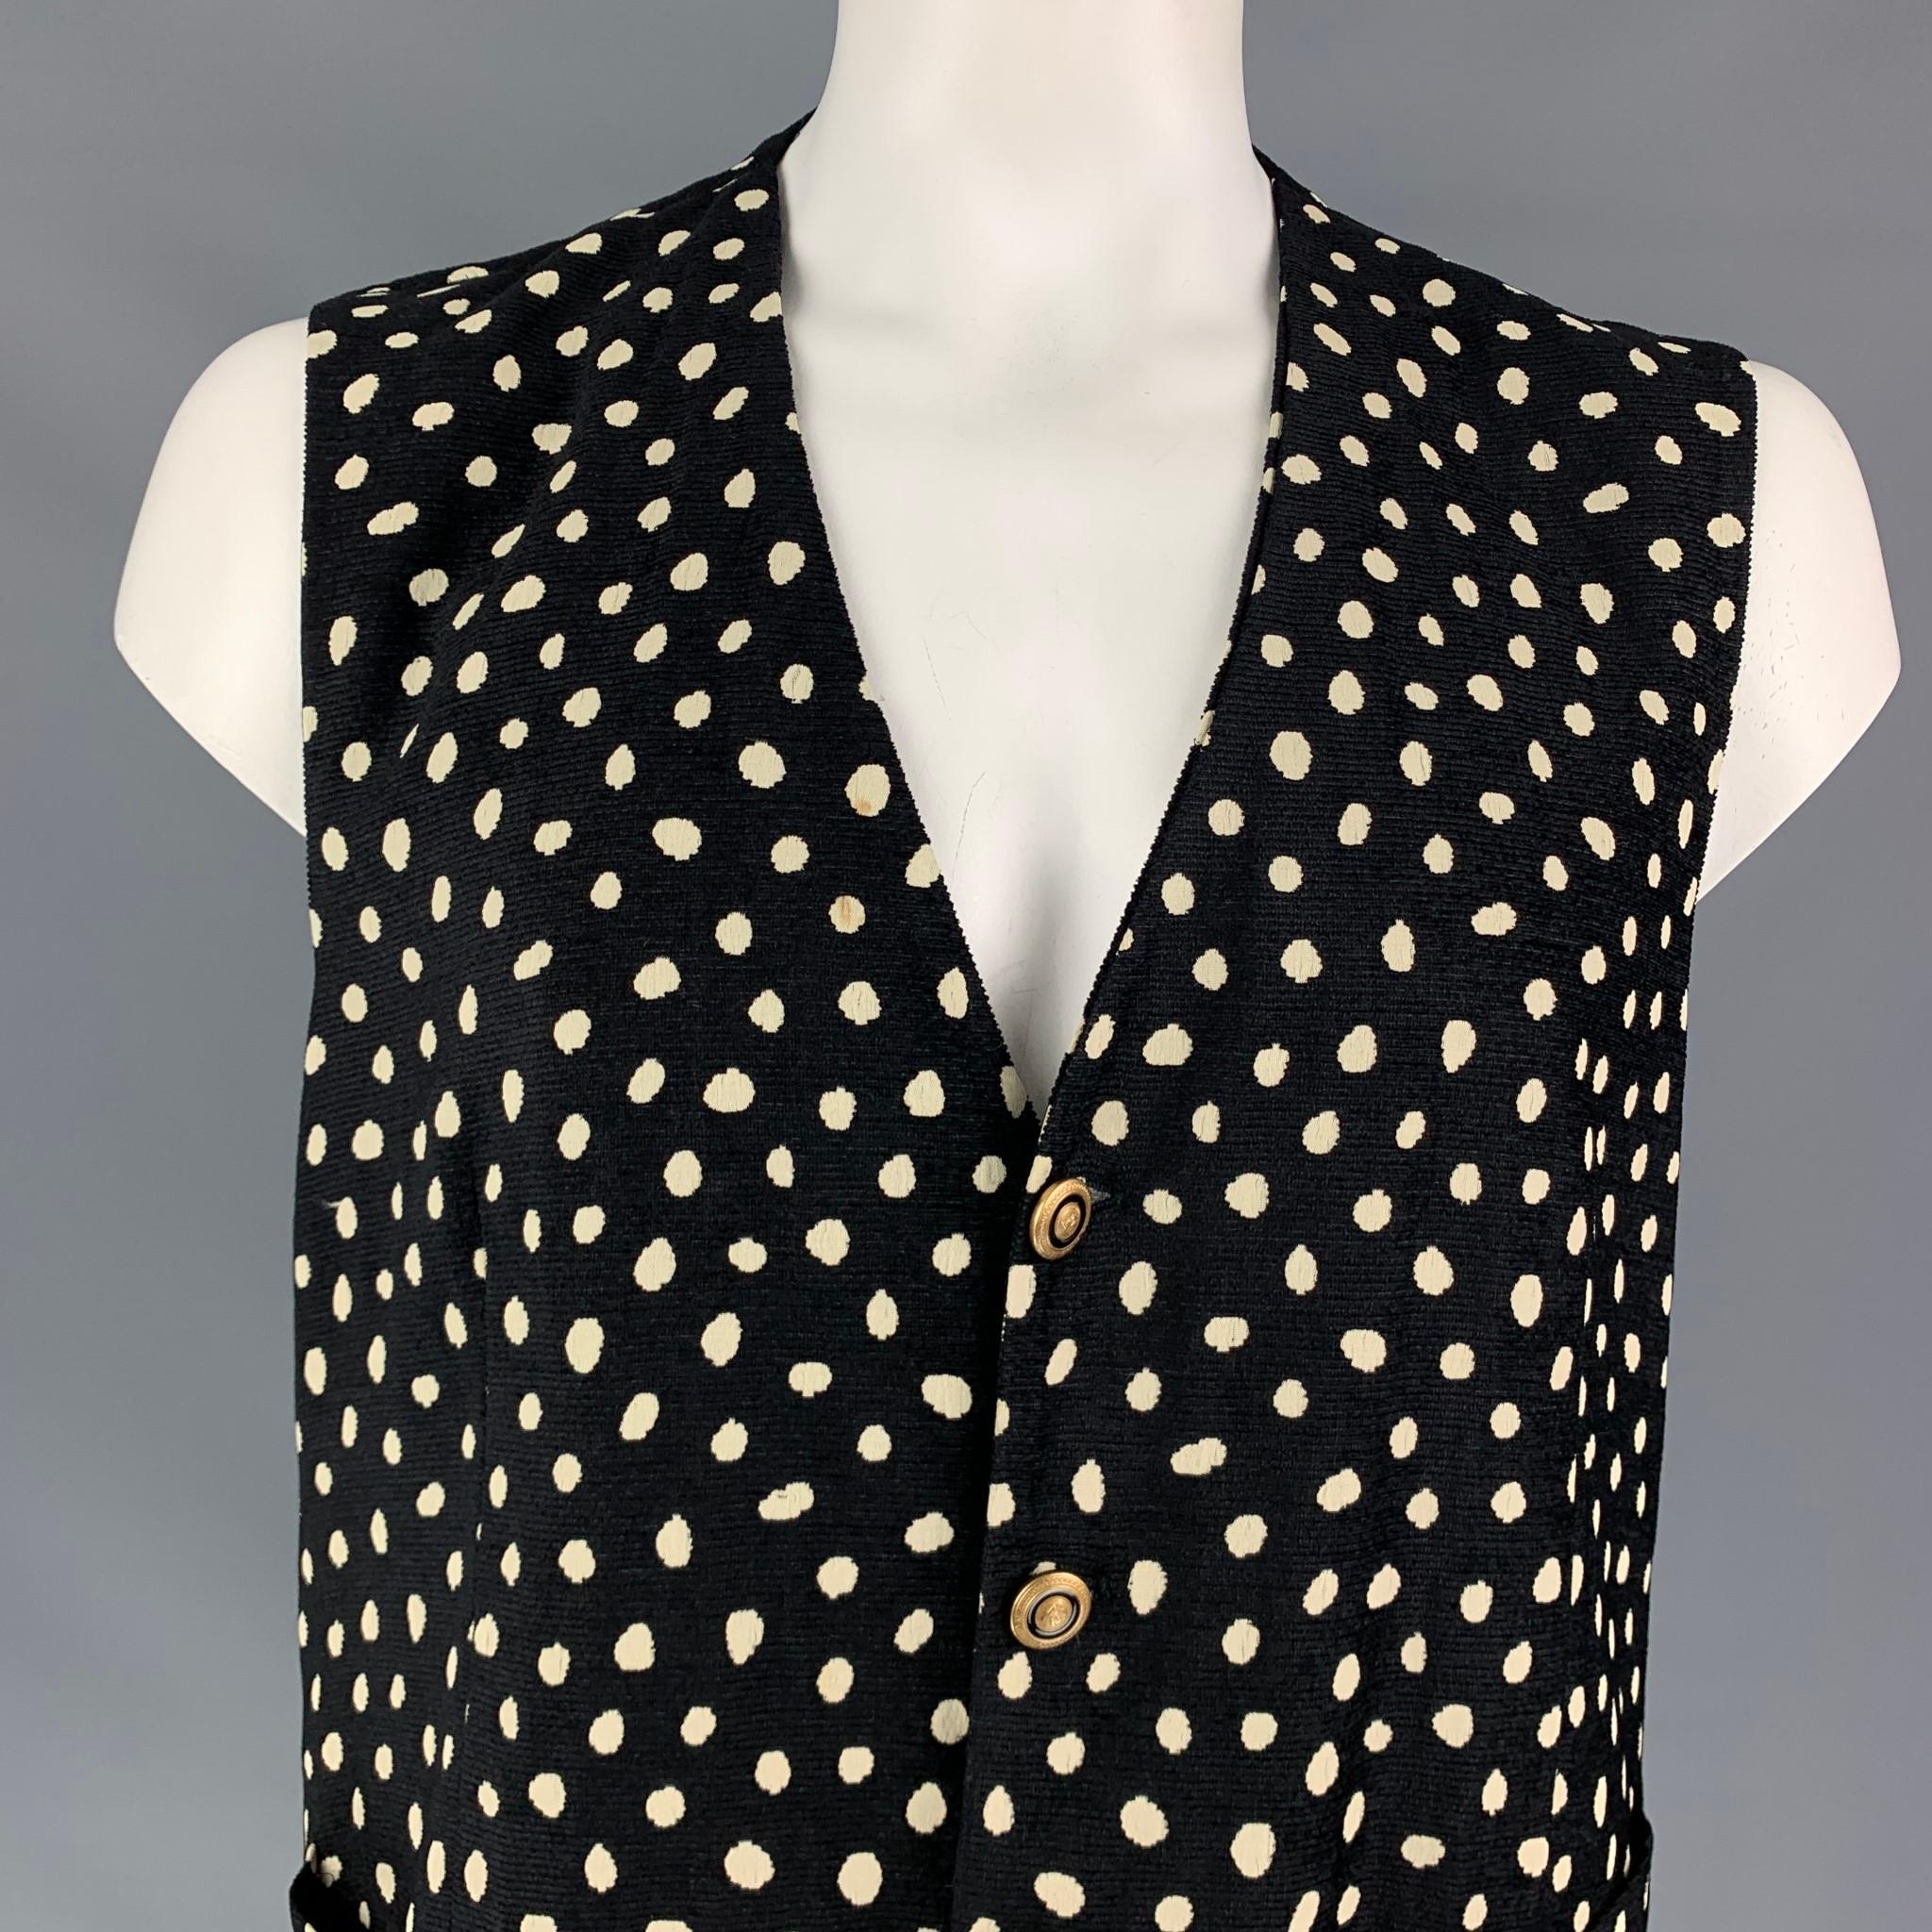 VERSACE CLASSIC vest comes in a black & white dot print viscose blend featuring slit pockets and a gold tone button closure. Made in Italy.

Very Good Pre-Owned Condition.
Marked: 56

Measurements:

Shoulder: 17 in.
Chest: 46 in.
Length: 24.5 in. 